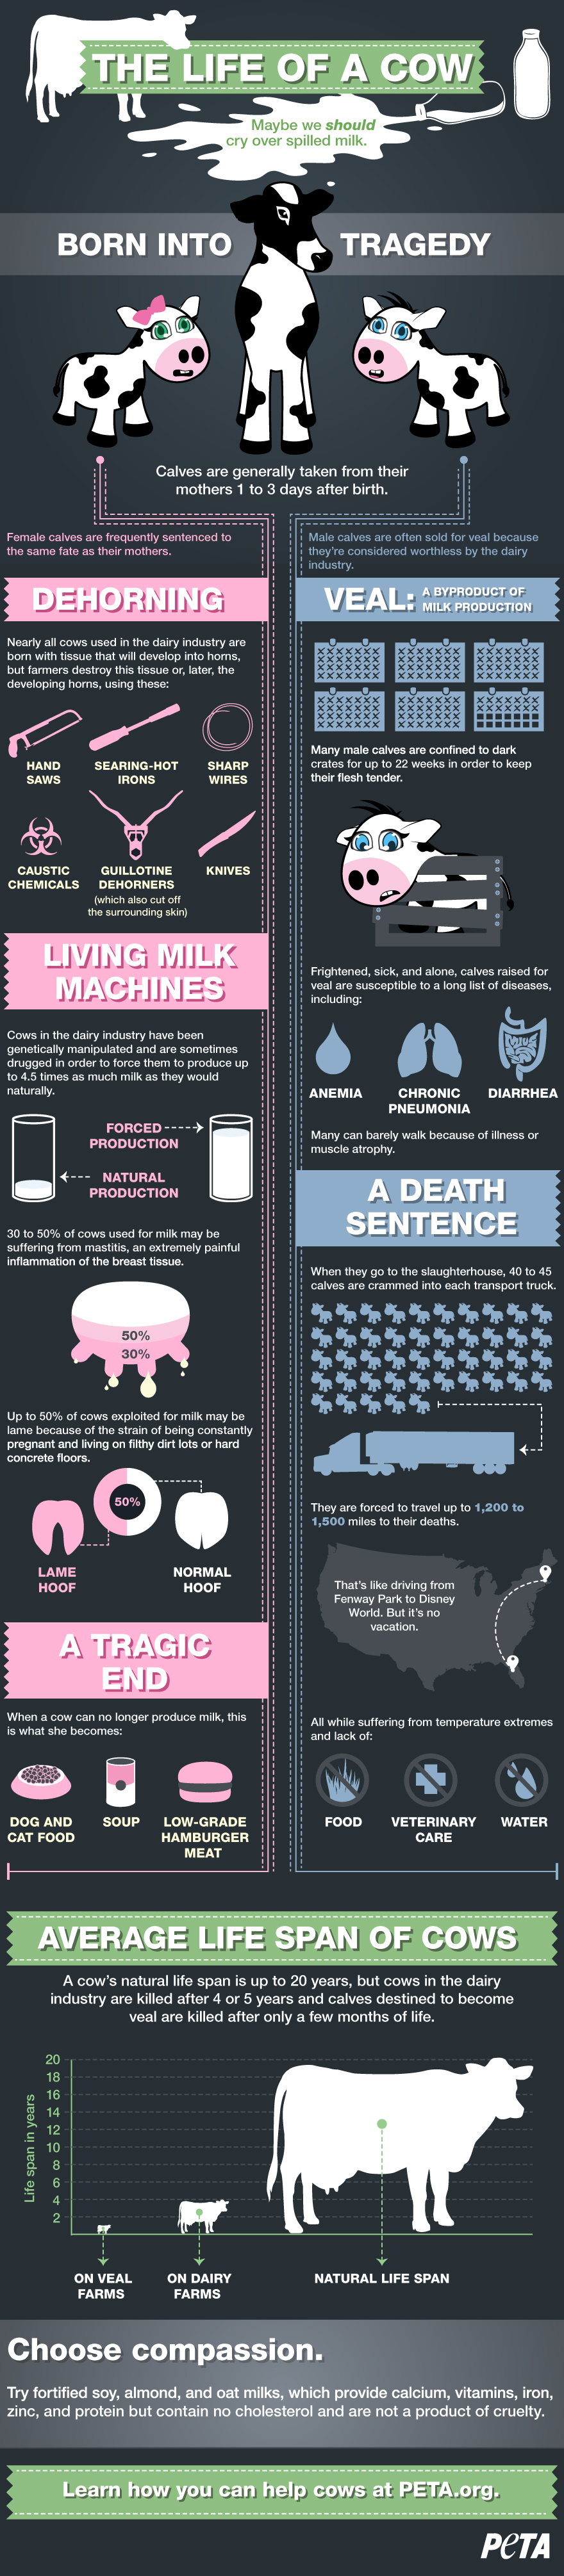 "The Life of A Cow (Infographic)" by PETA.org